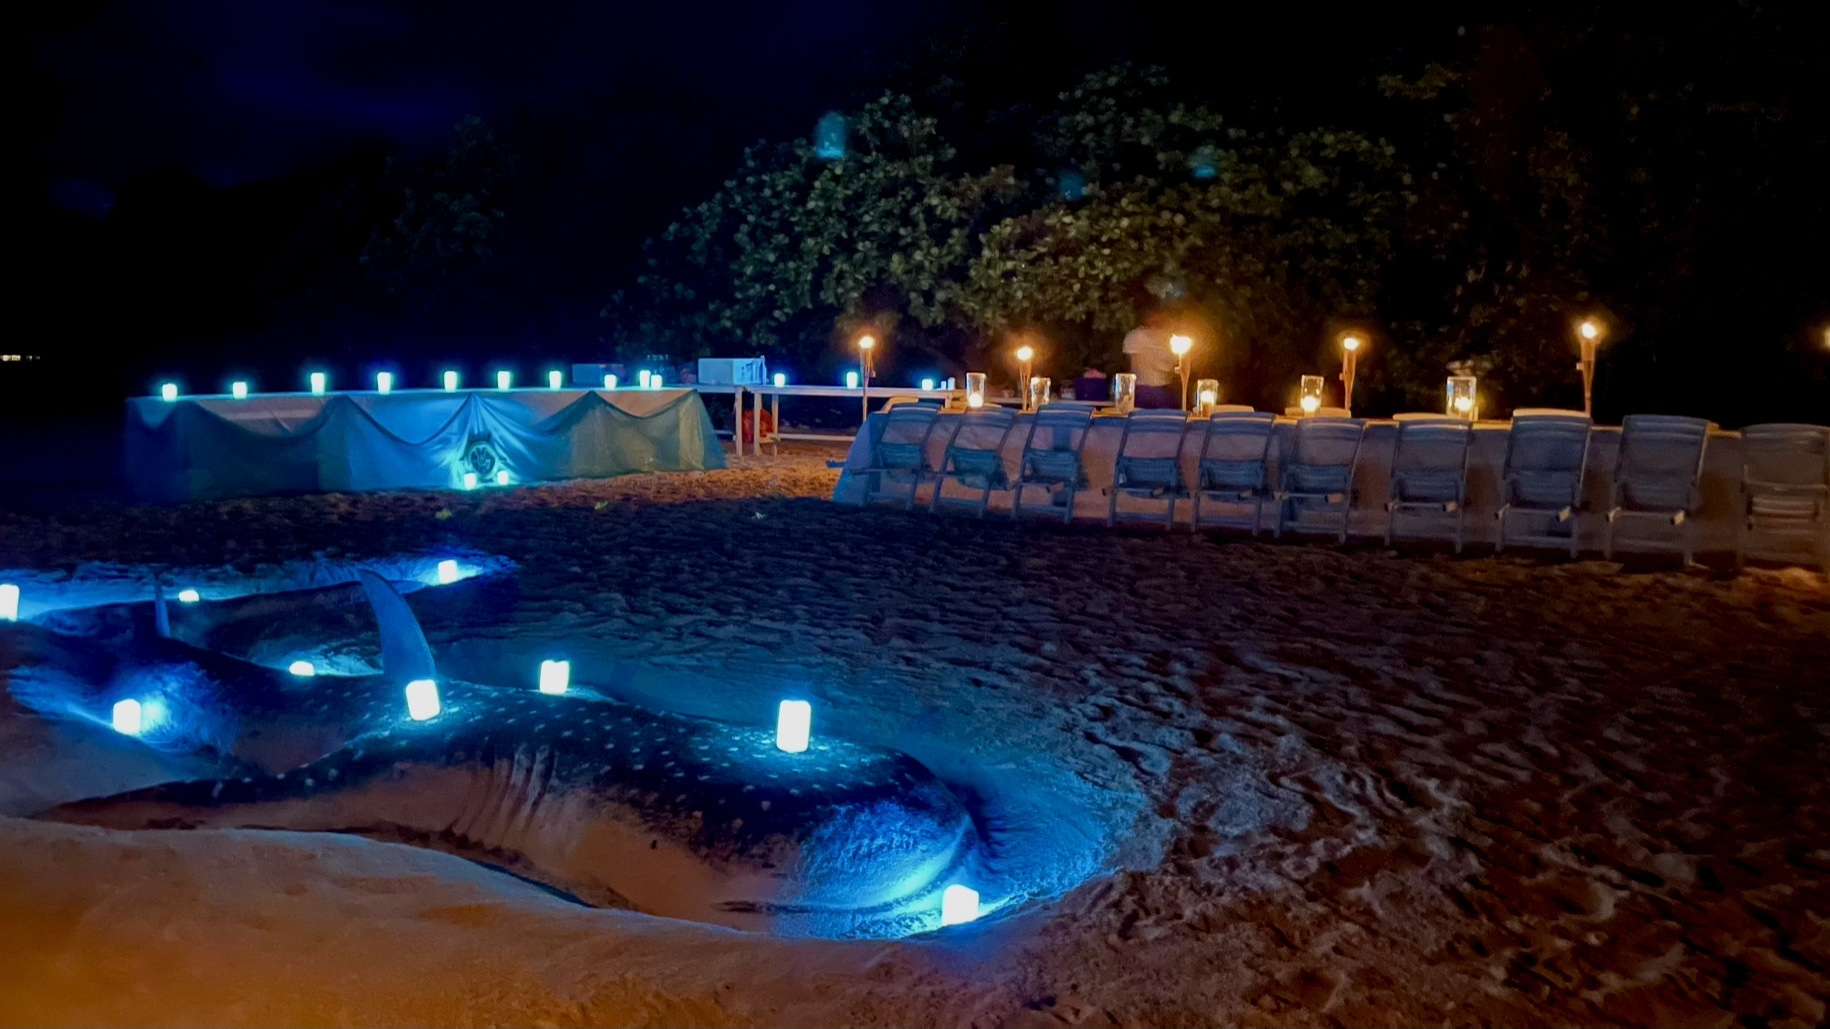 SAFIRA Yacht Charter - amazing sand art created by the crew of SAFIRA for an evening beach set up and dinner